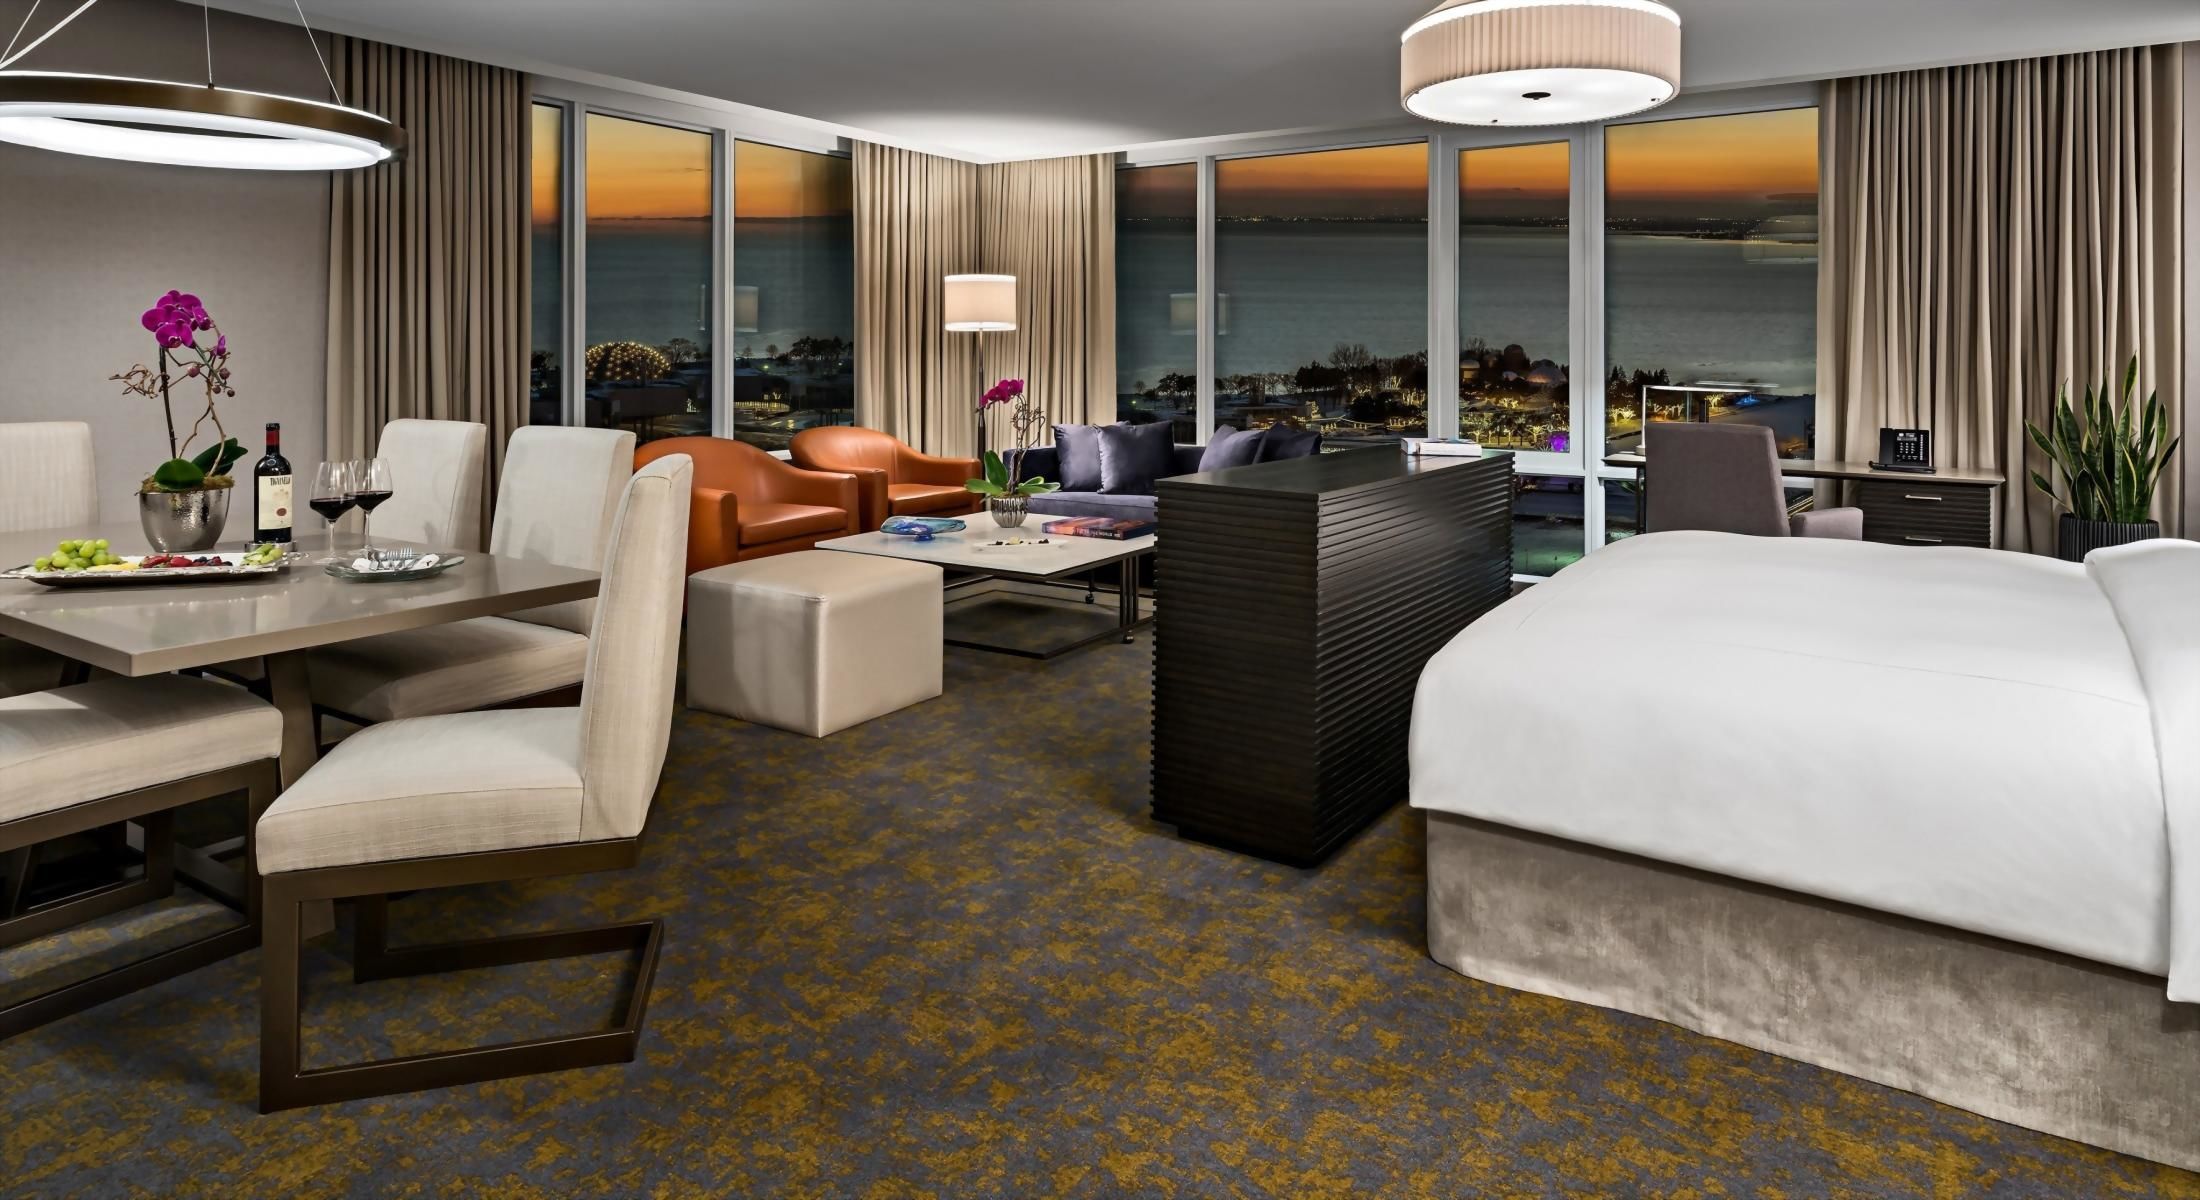 The Junior Suite is up to 860 sq feet featuring a king bed, living room area, and dining area.